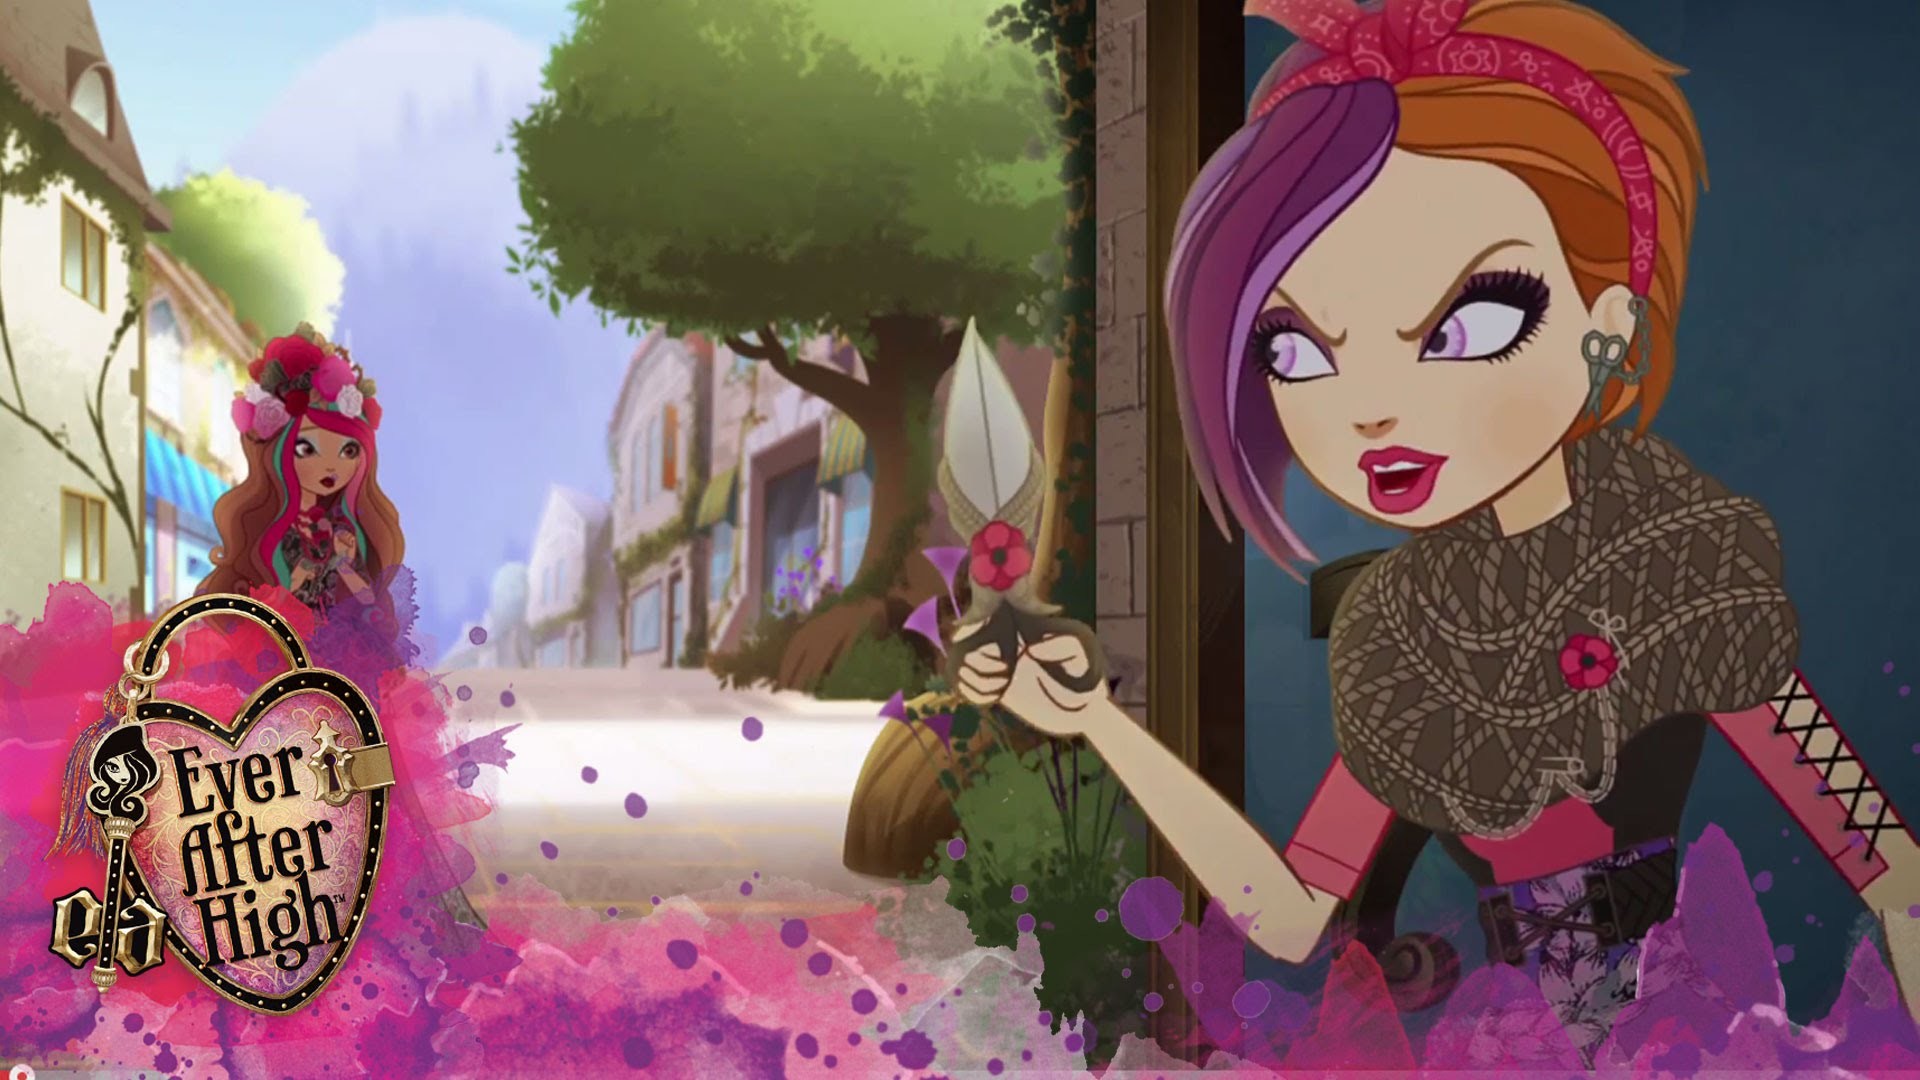 Spring Unsprung Somethings Wicked at Ever After High Ever After High – YouTube